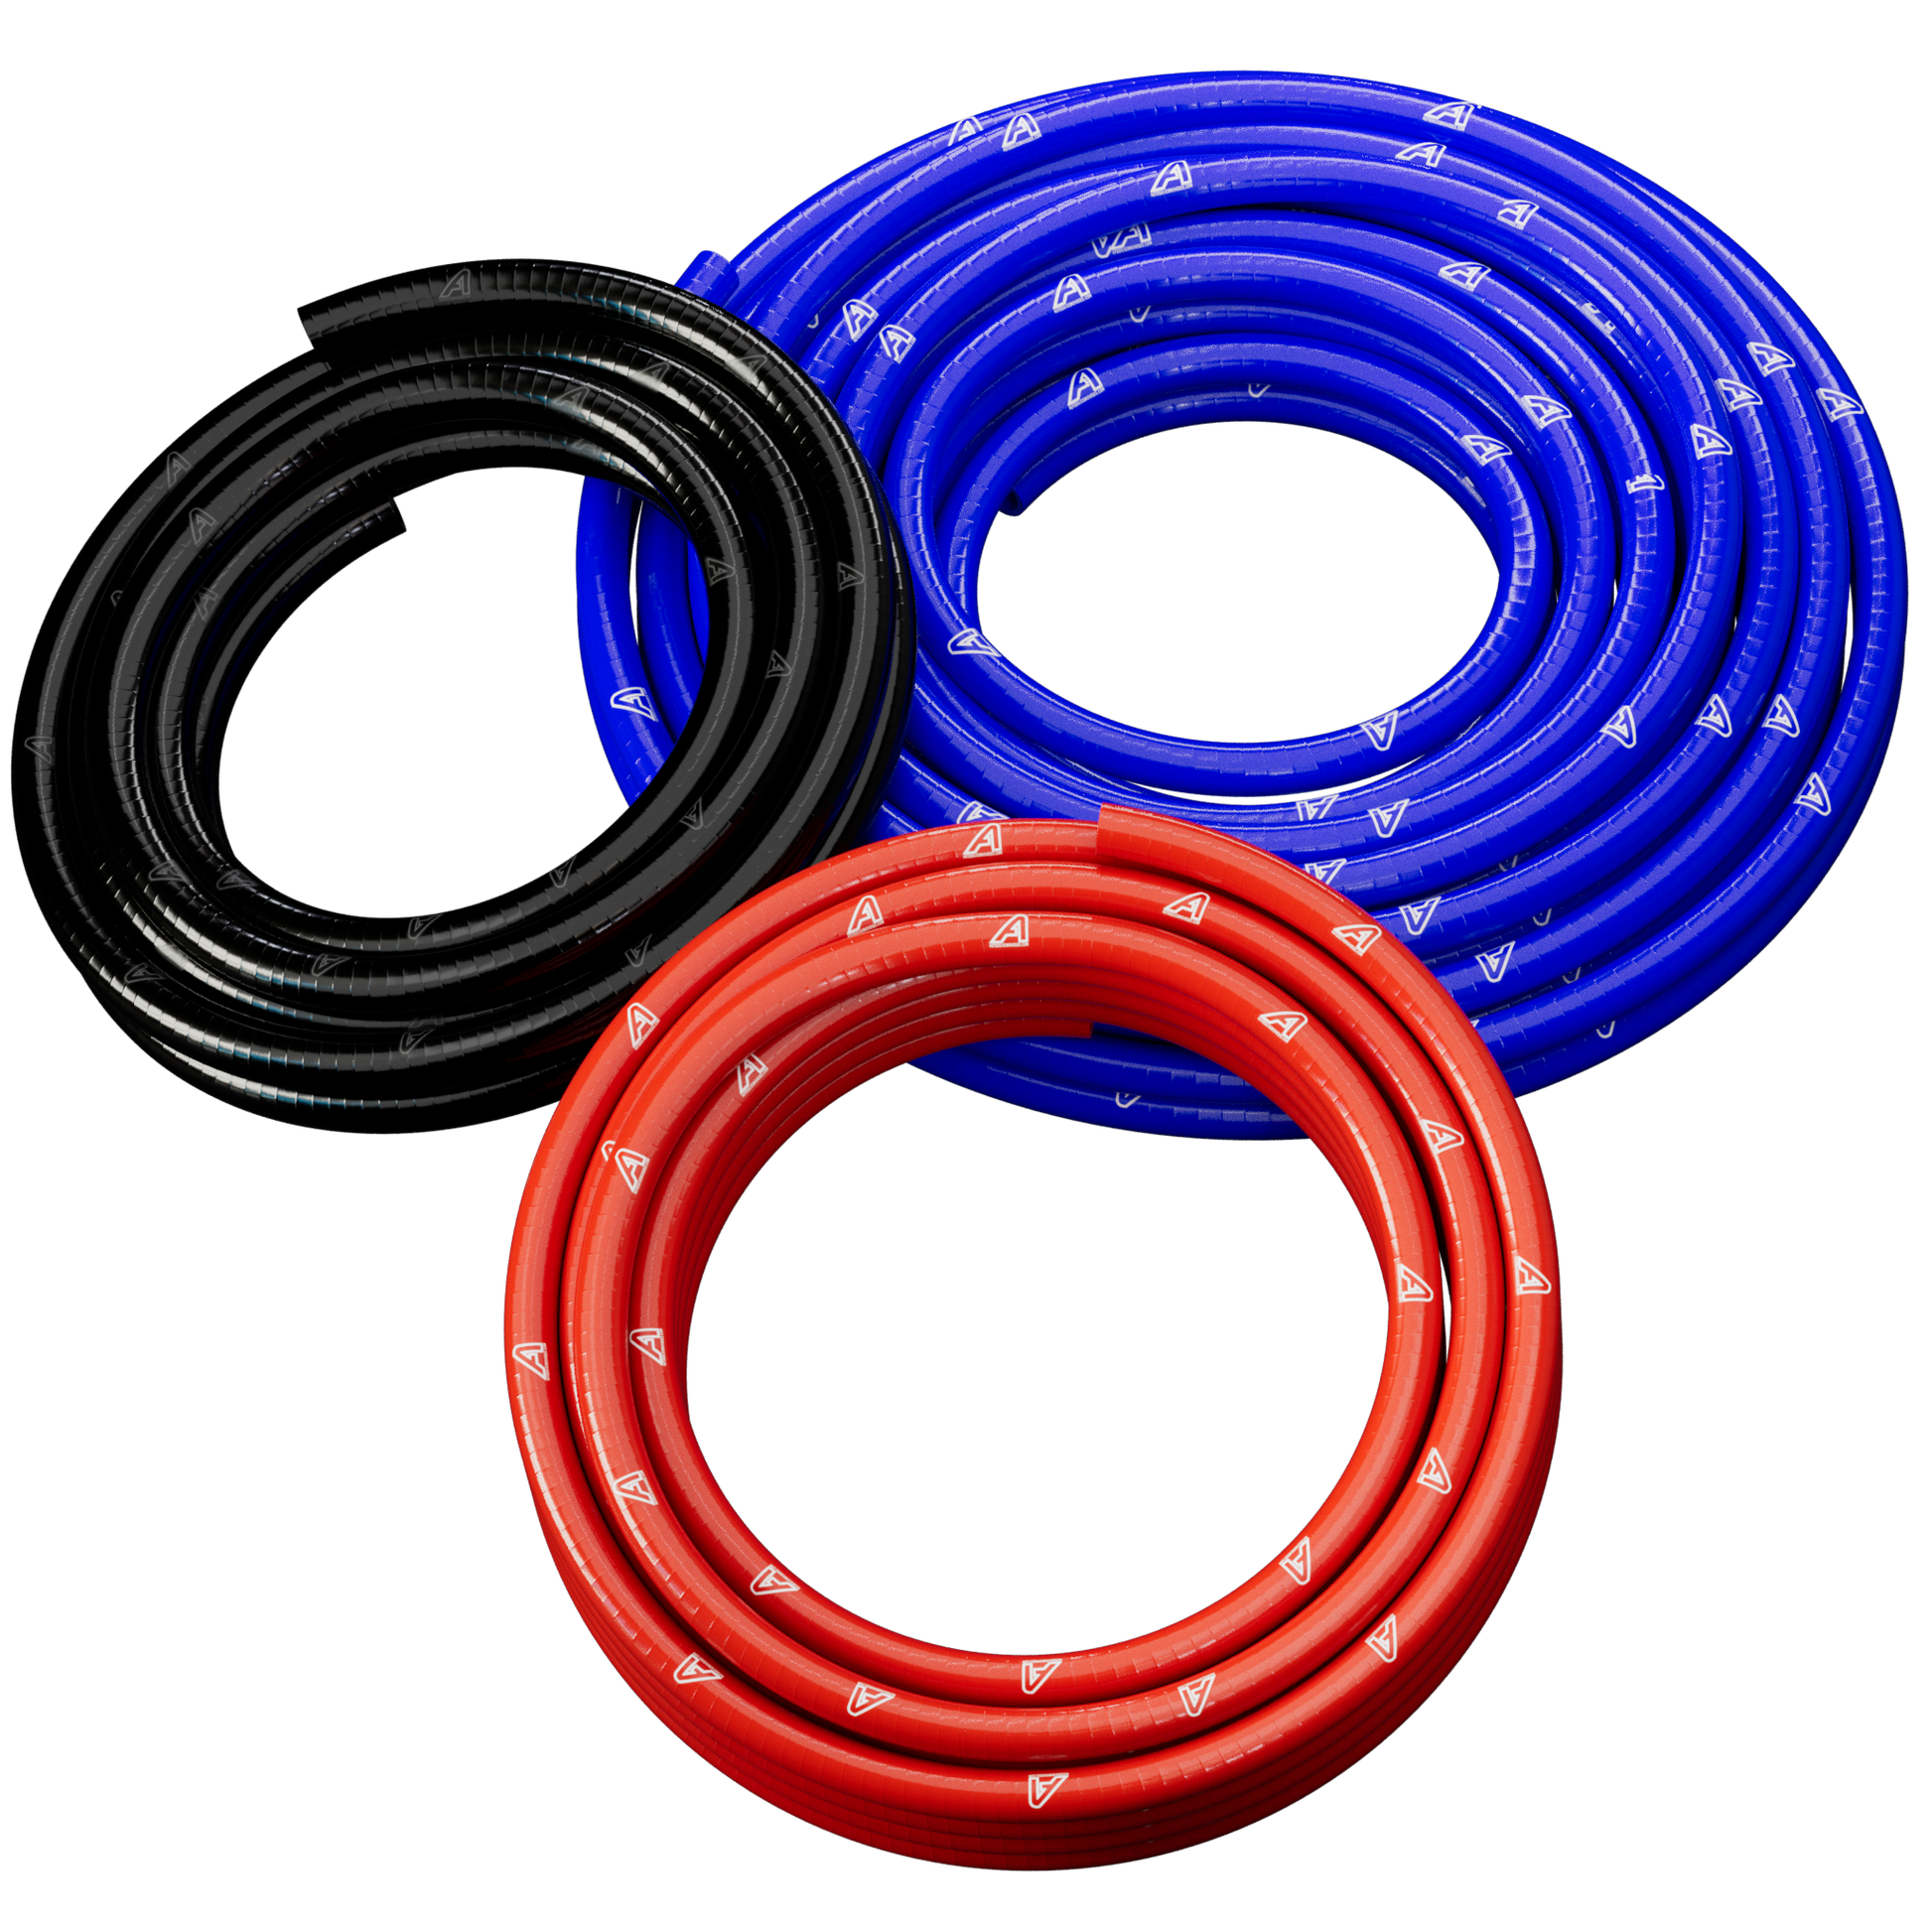 8mm (5/16") ID Silicone Air & Water 3 Ply Hose Motor Vehicle Engine Parts Auto Silicone Hoses   